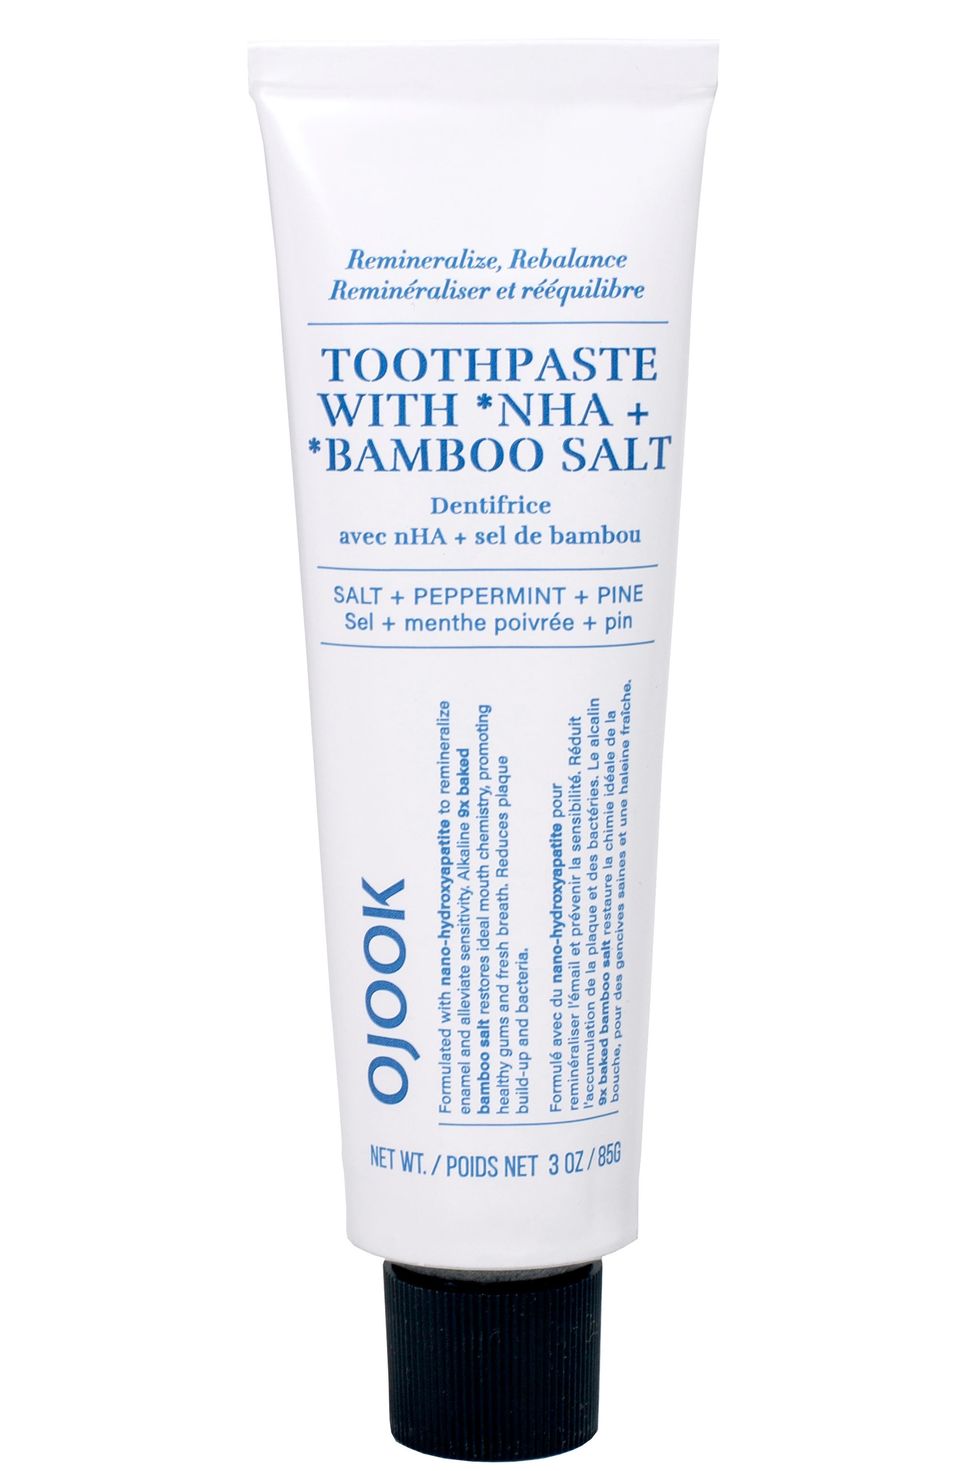 Toothpaste with nHA + Bamboo Salt